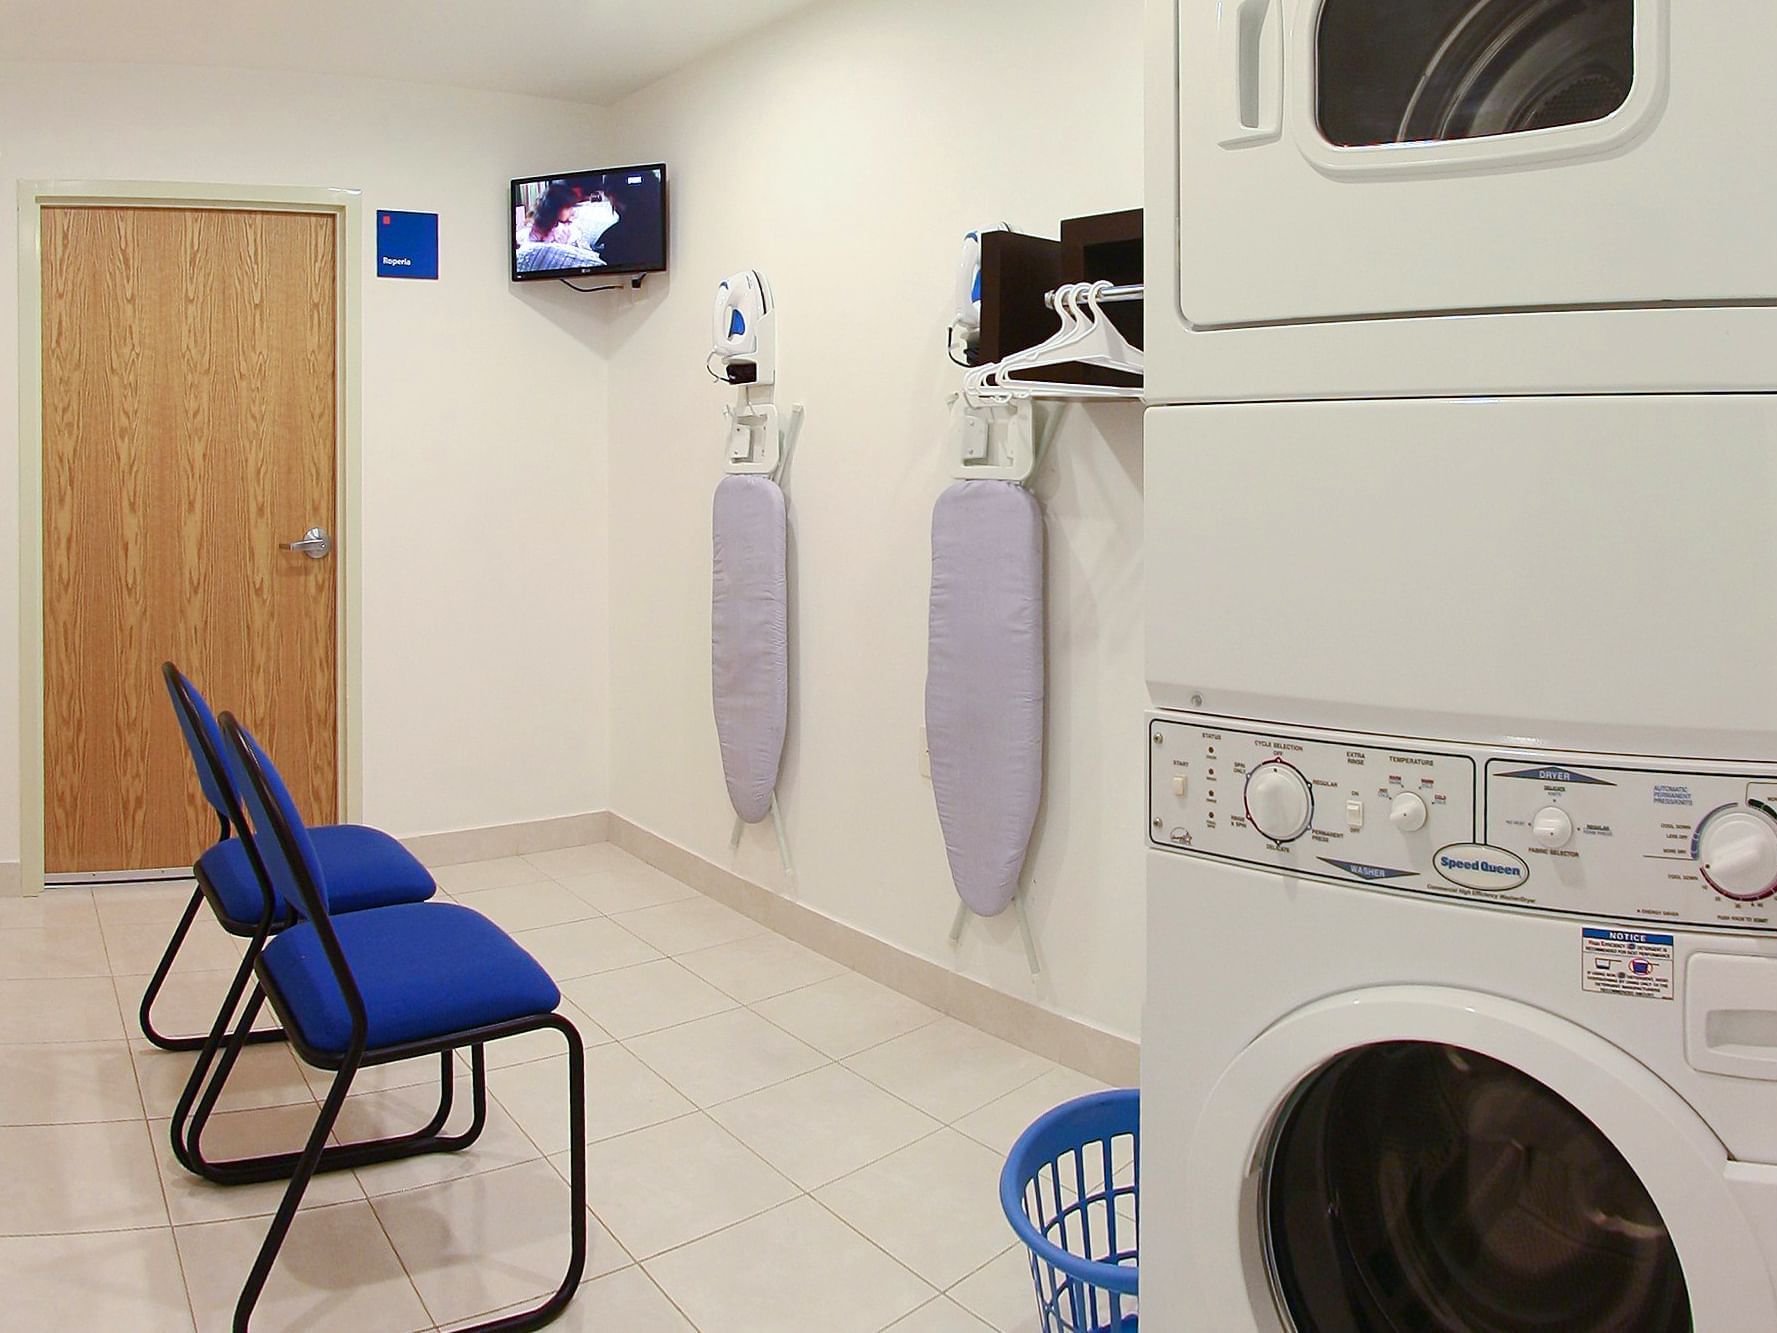 Washing machine, dryer & irons in Laundry Room at One Hotels